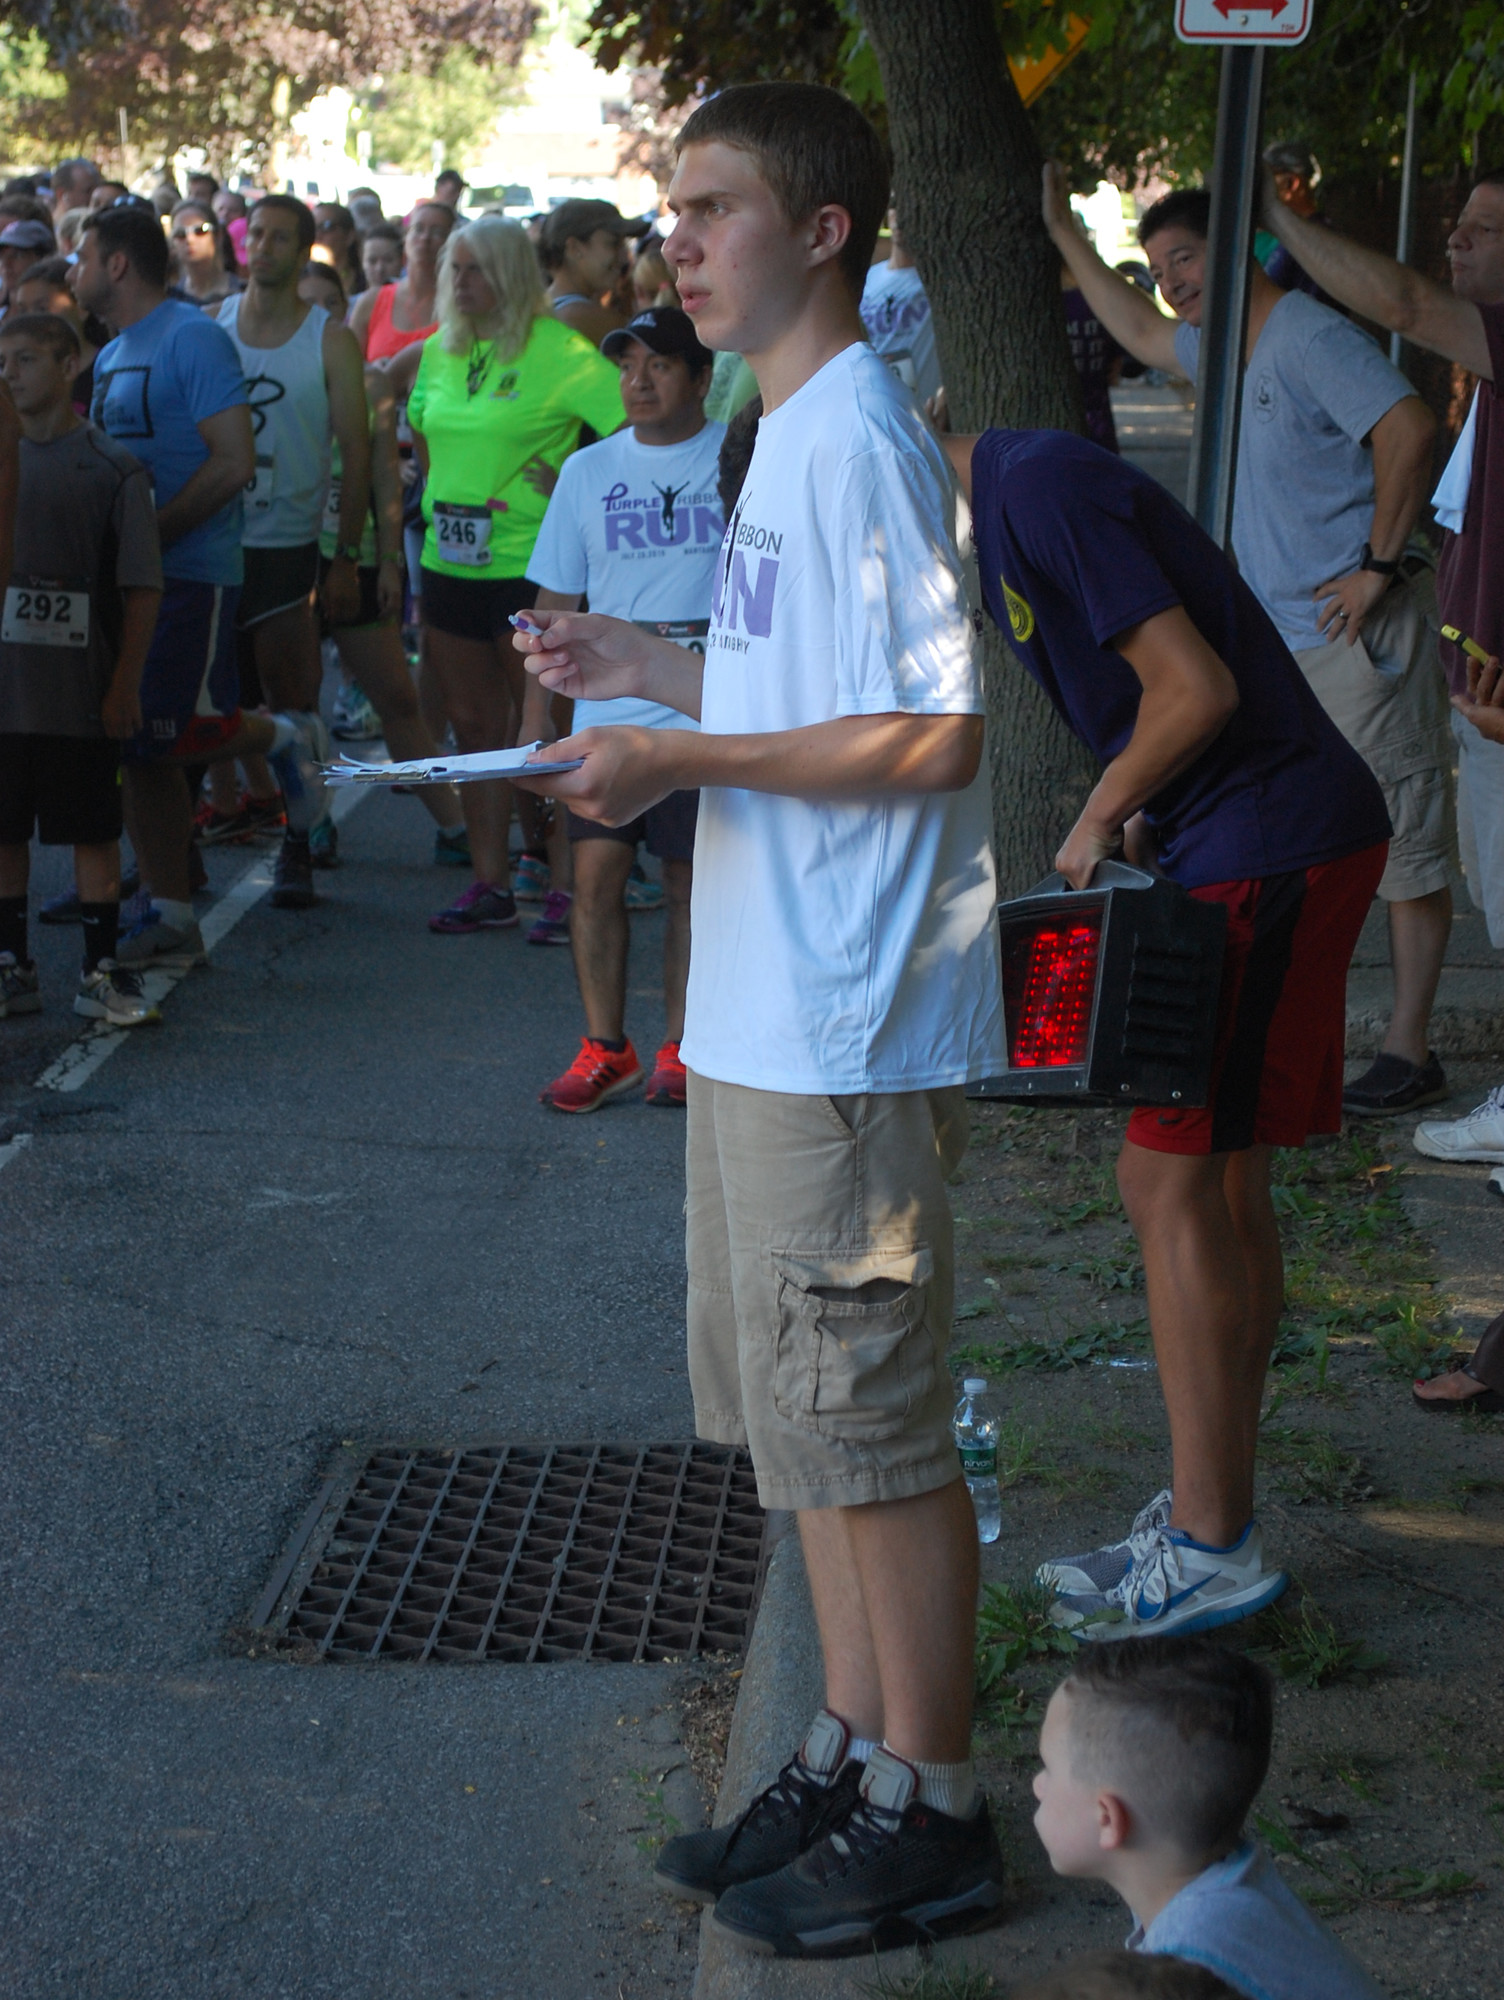 Justin Rockitter, 17, who organized the Purple Ribbon Run in honor of his late grandmother, Susan, kept an eye on the starting line.